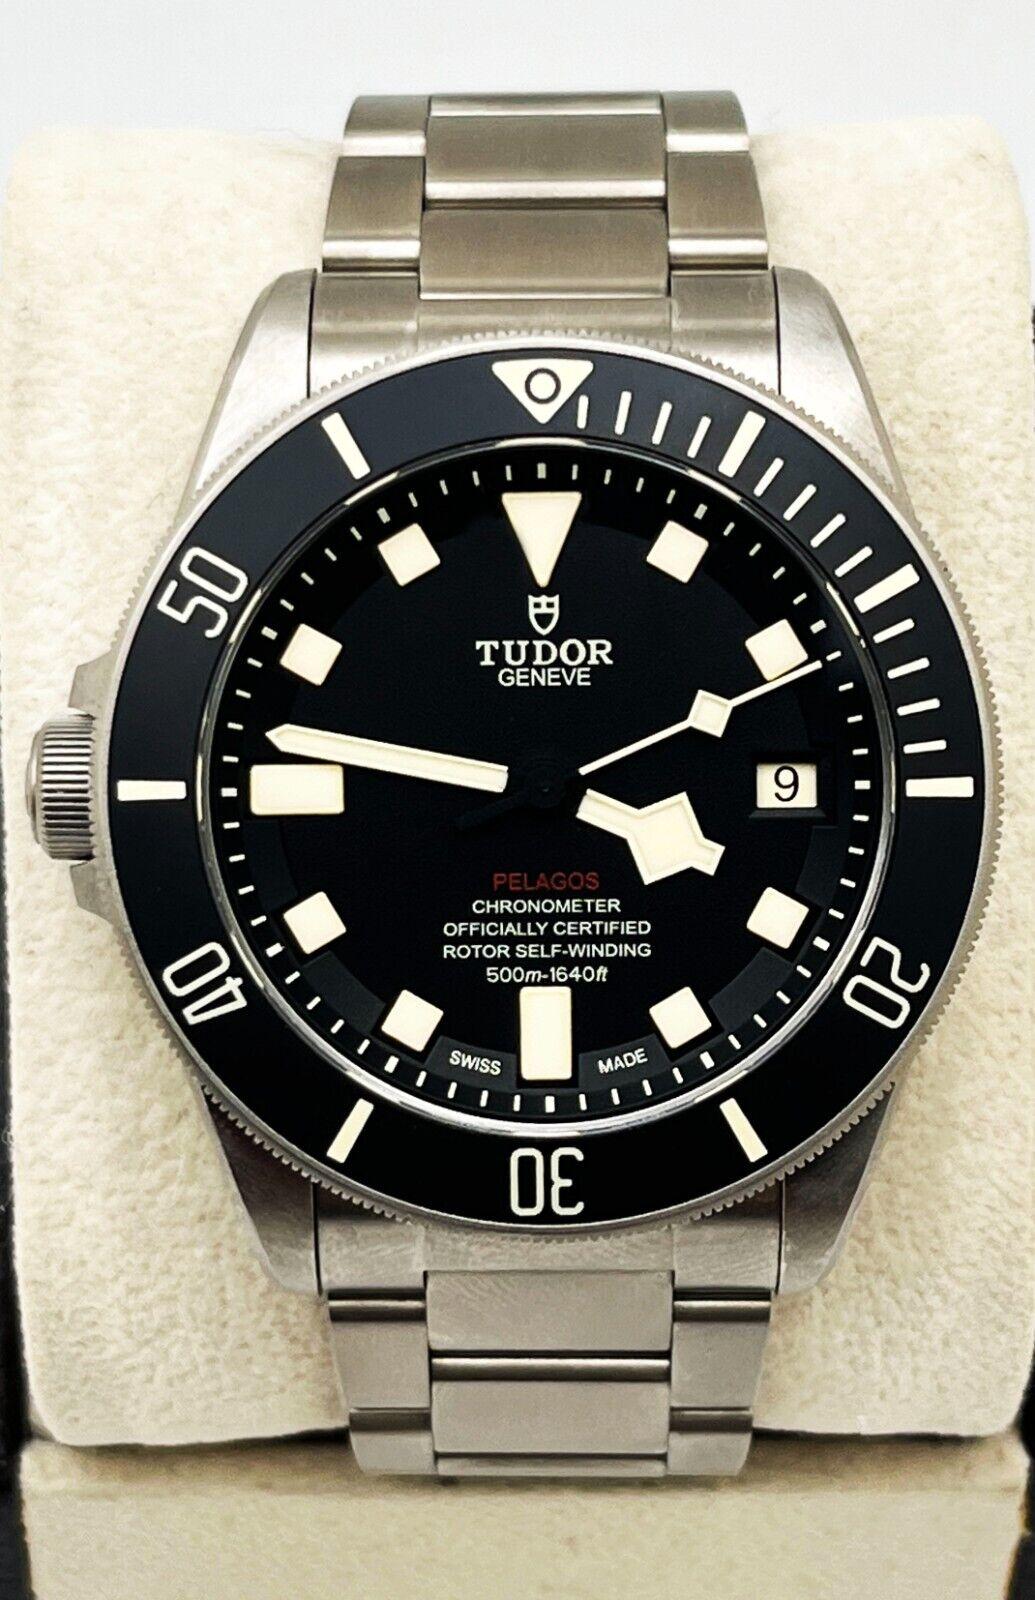 Style Number: 25610TNL 
 
Serial: 242W***

Year: 2022
 
Model: Pelagos LHD
 
Case Material: Titanium 
 
Band: Titanium
 
Bezel: Black
 
Dial: Black
 
Face: Sapphire Crystal 
 
Case Size: 42mm
 
Includes: 
-Tudor Box & Paper
-Certified Appraisal 
-5